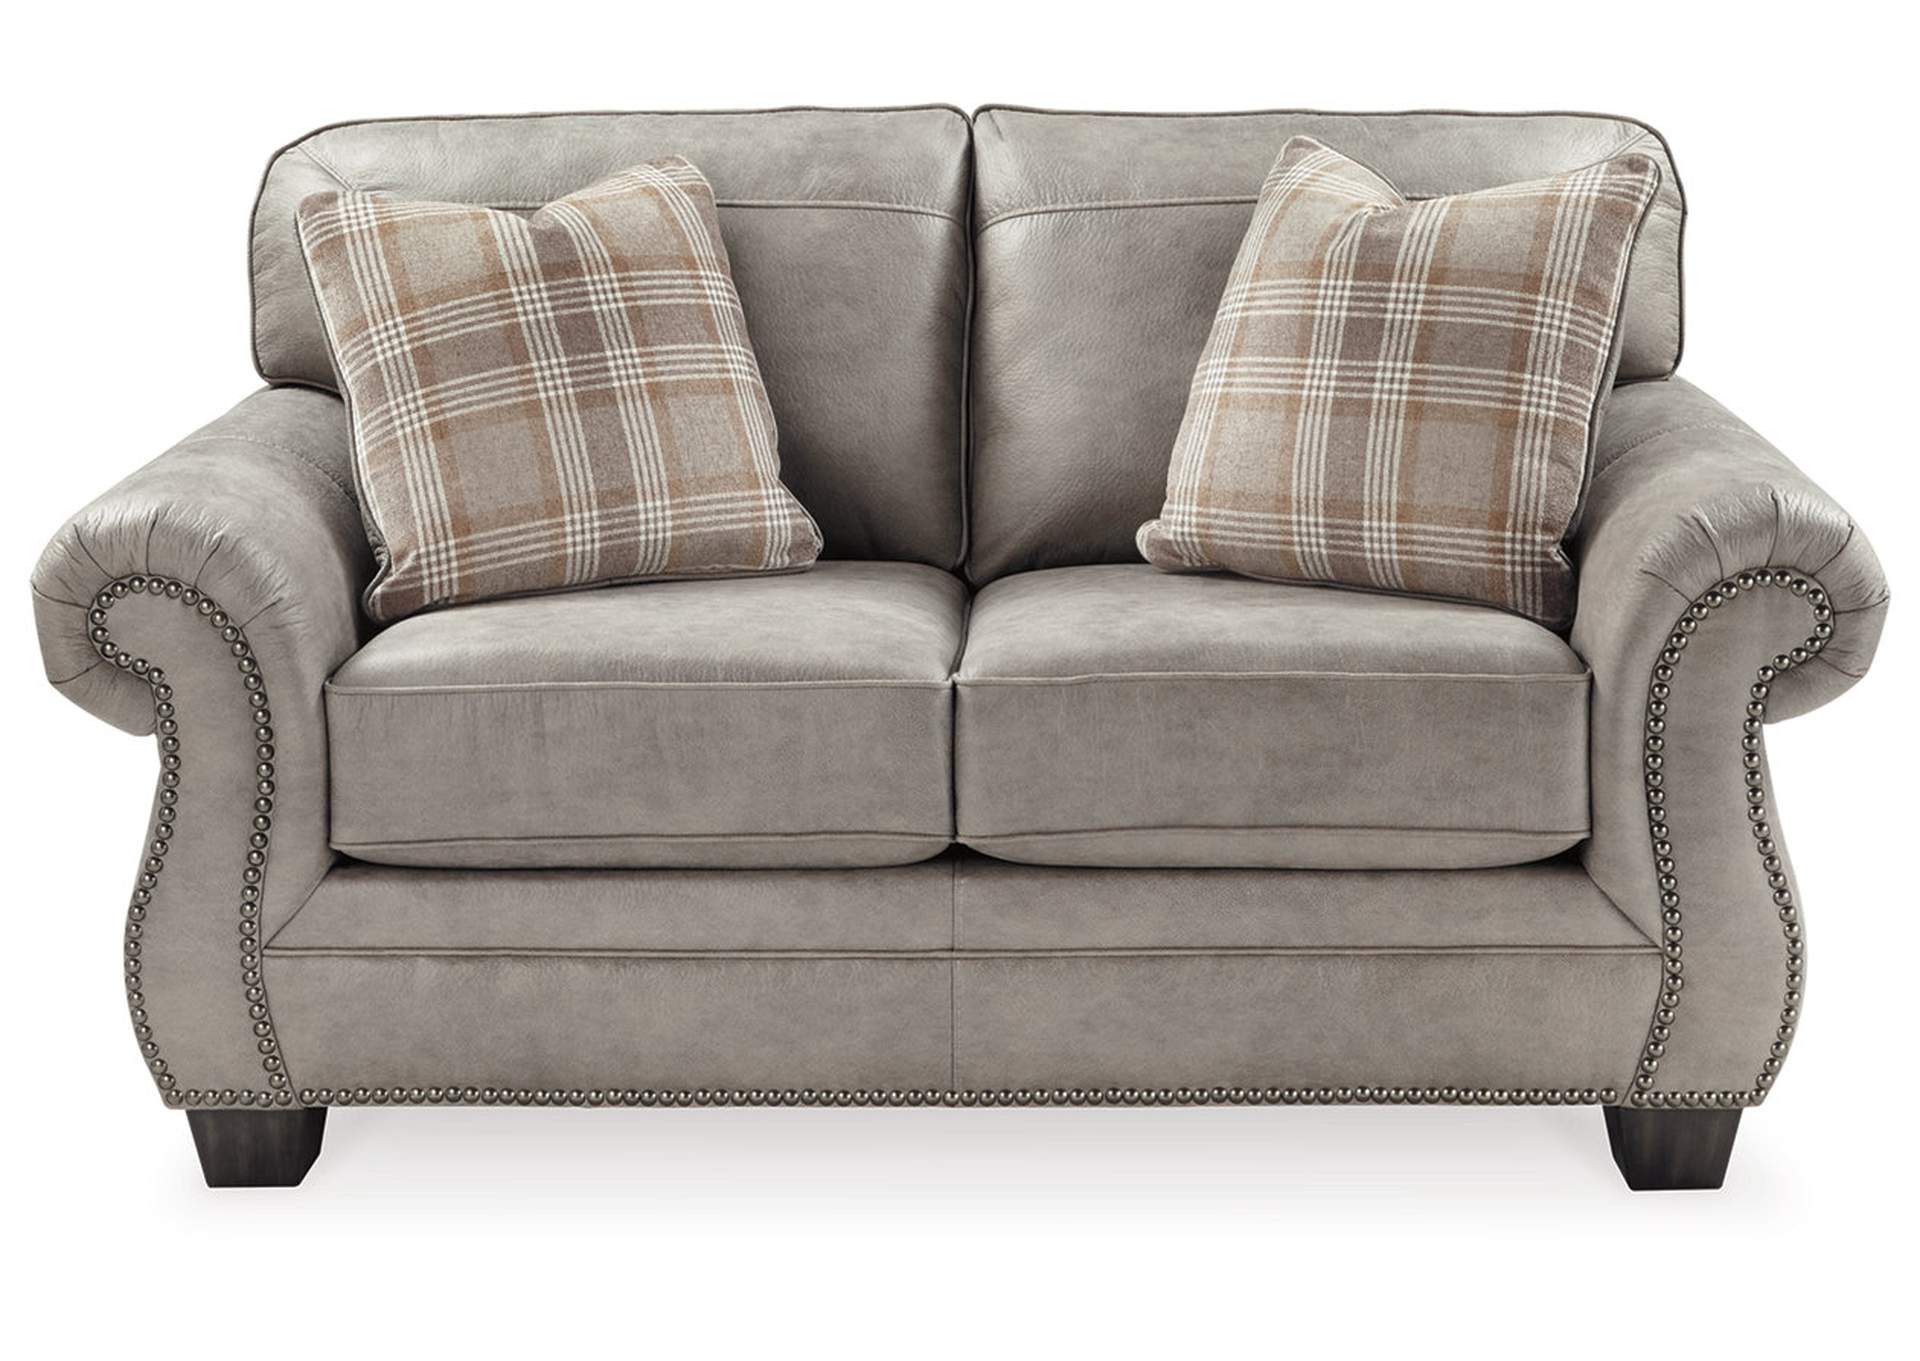 Olsberg Sofa and Loveseat with Chair and Ottoman,Signature Design By Ashley